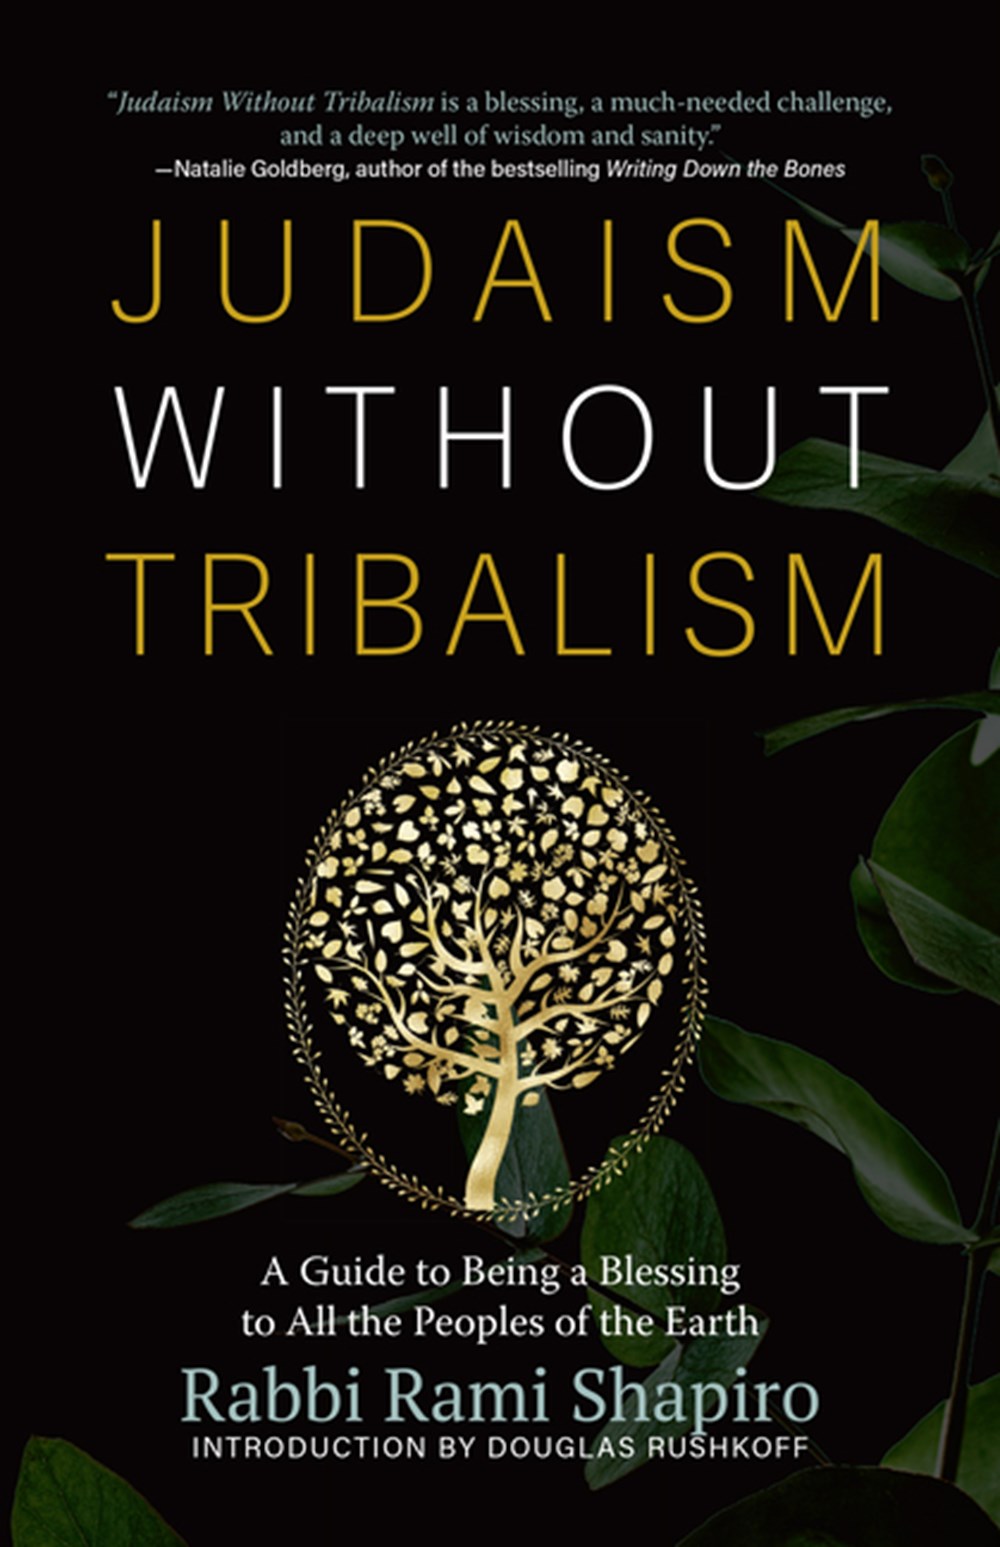 Judaism Without Tribalism A Guide to Being a Blessing to All the Peoples of the Earth